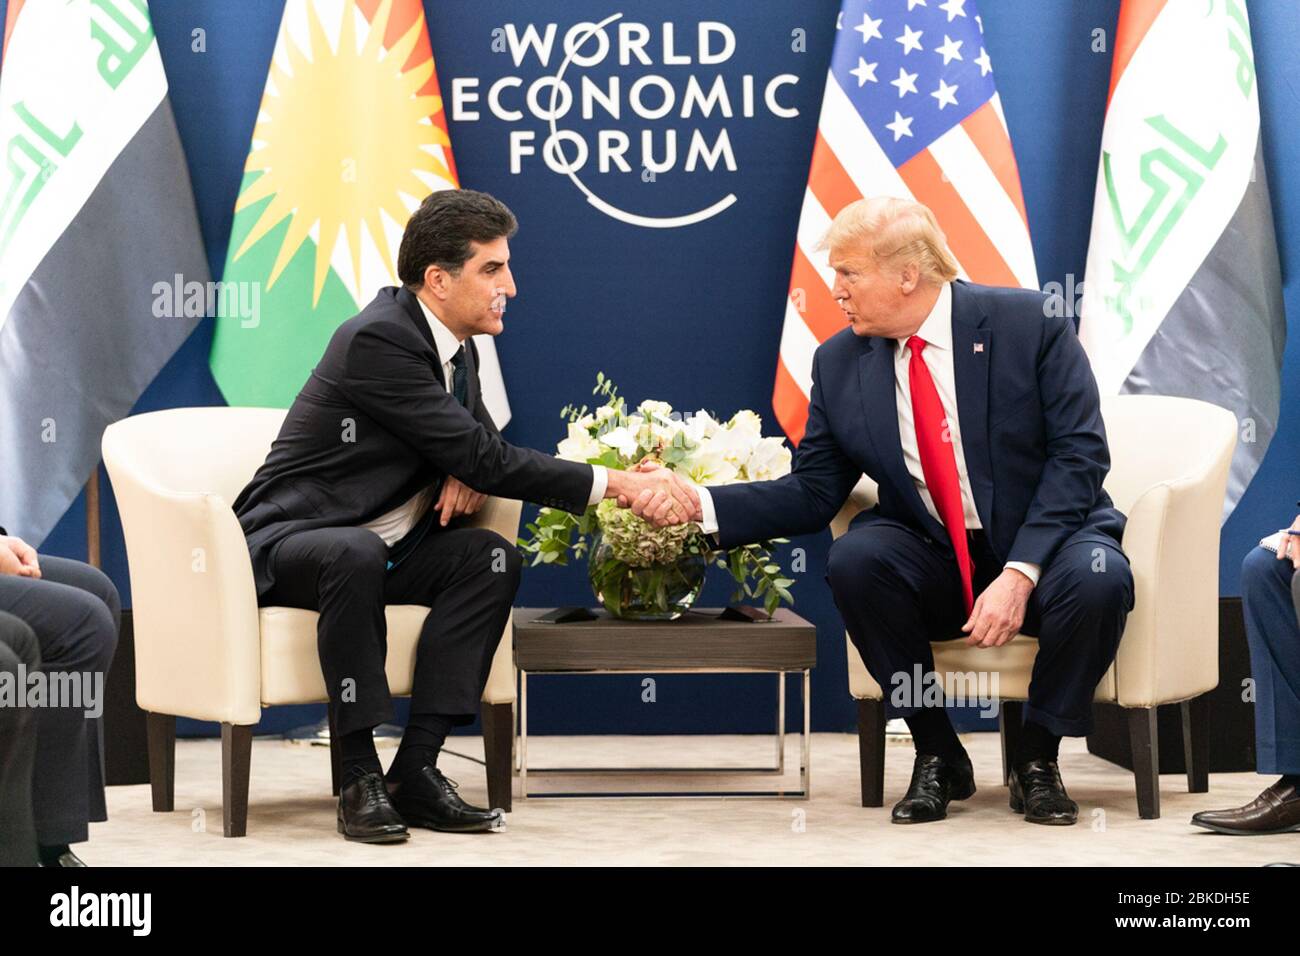 President Donald J. Trump meets with the President of the Kurdistan Regional Government Nechirvan Barzani Wednesday, Jan. 22, 2020, at the Davos Congress Centre in Davos, Switzerland. President Trump at Davos Stock Photo